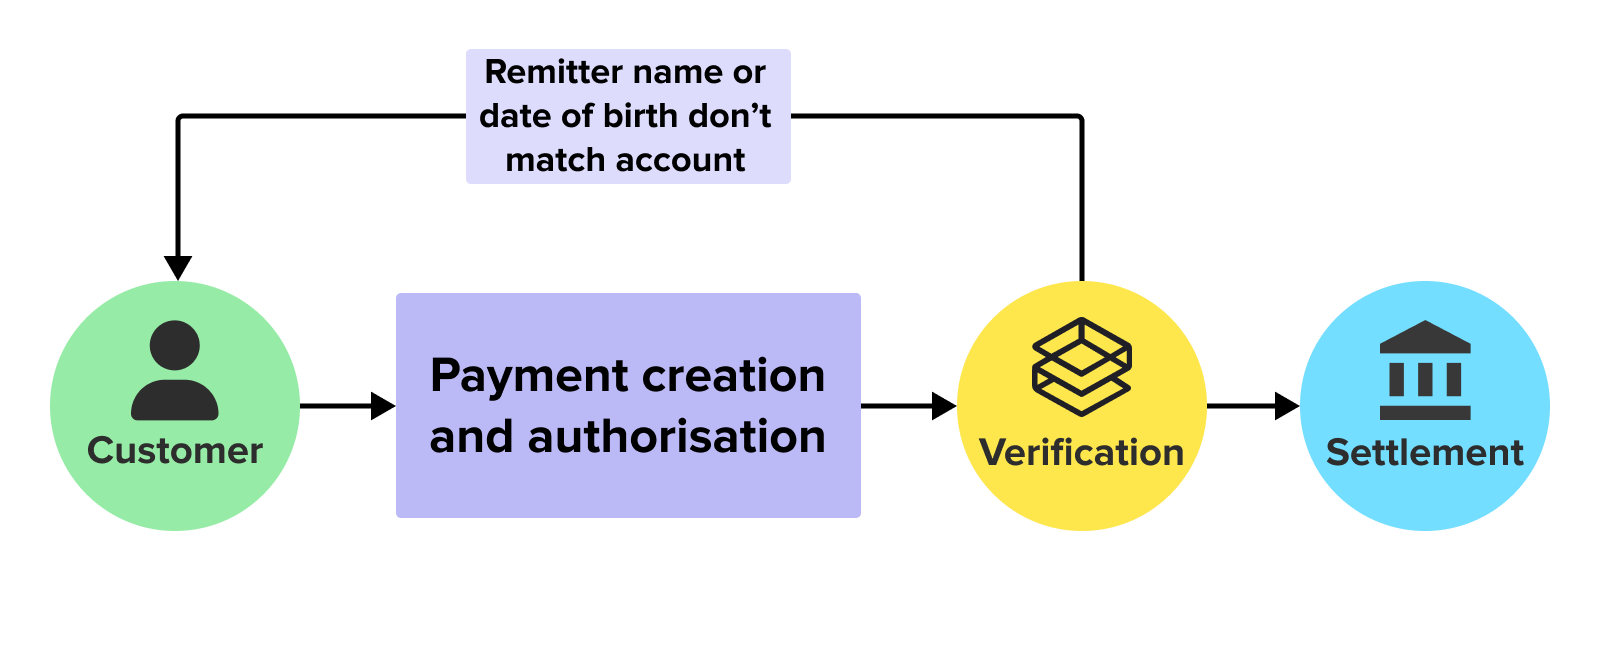 Payment verification occurs after a payment has been created and authorised by the user. If a payment doesn't pass verification, the funds are returned to the customer account.